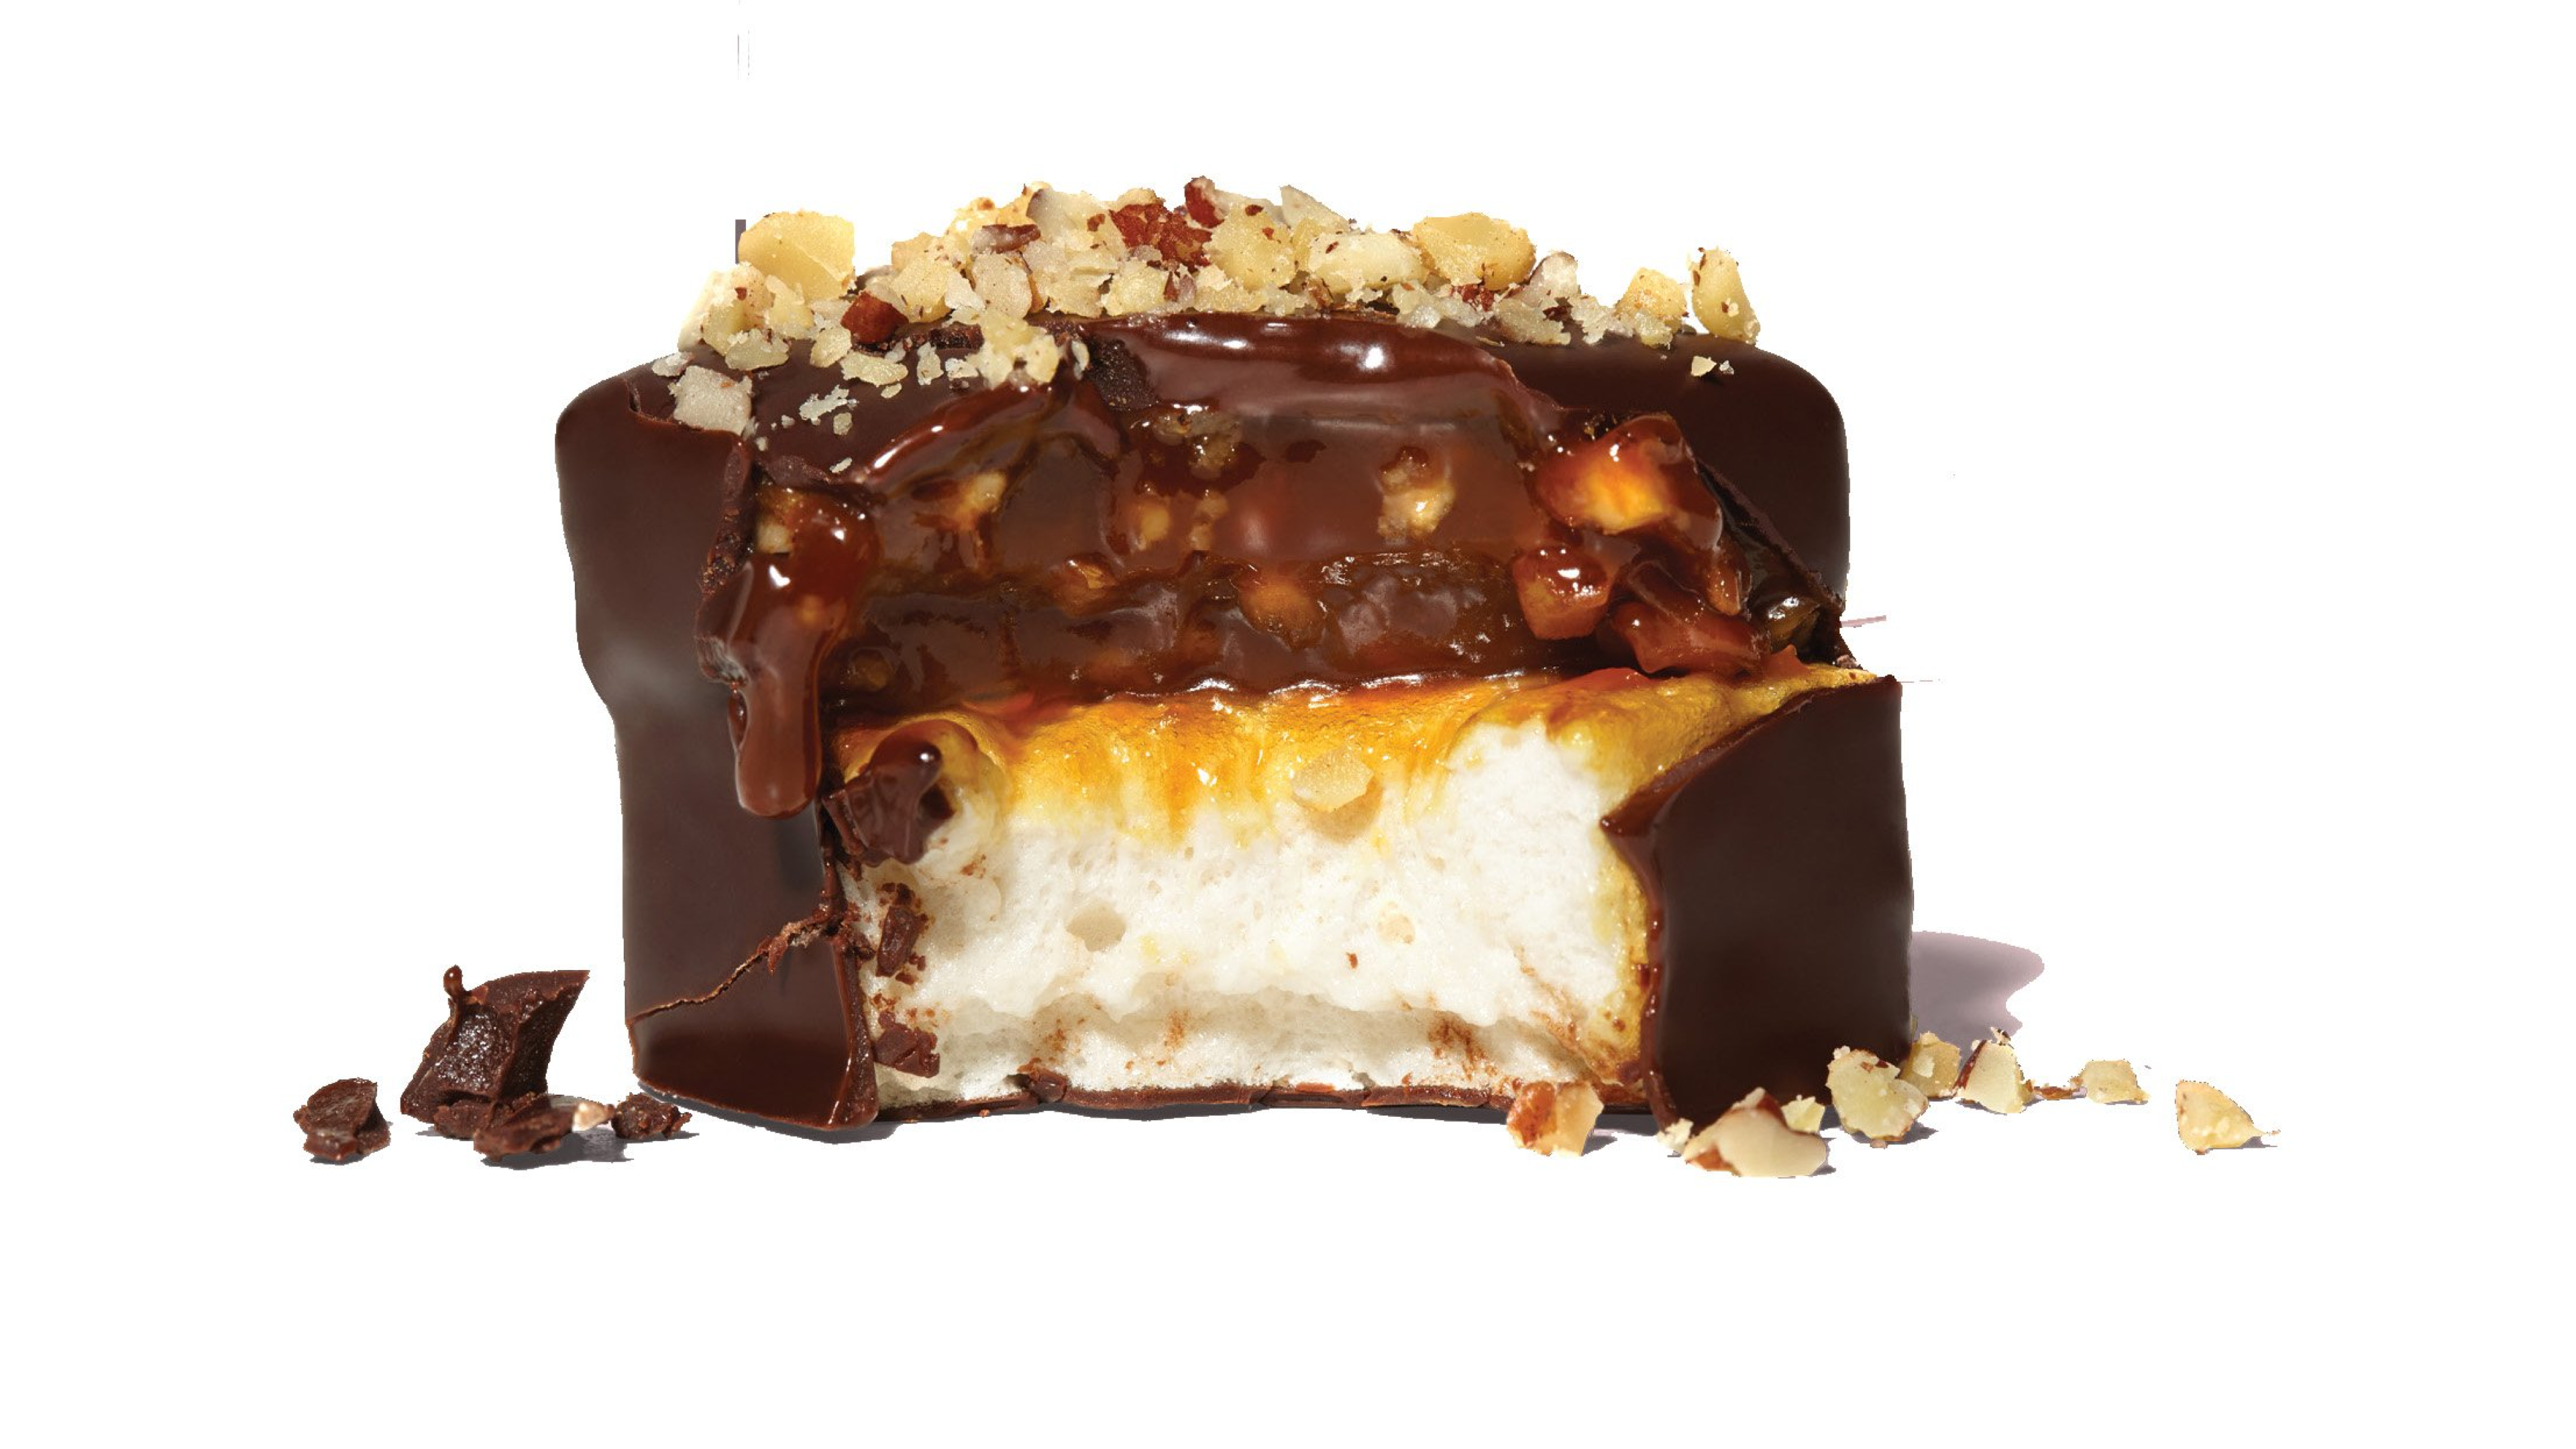 caramel marshmallows covered in chocolate with nuts on top